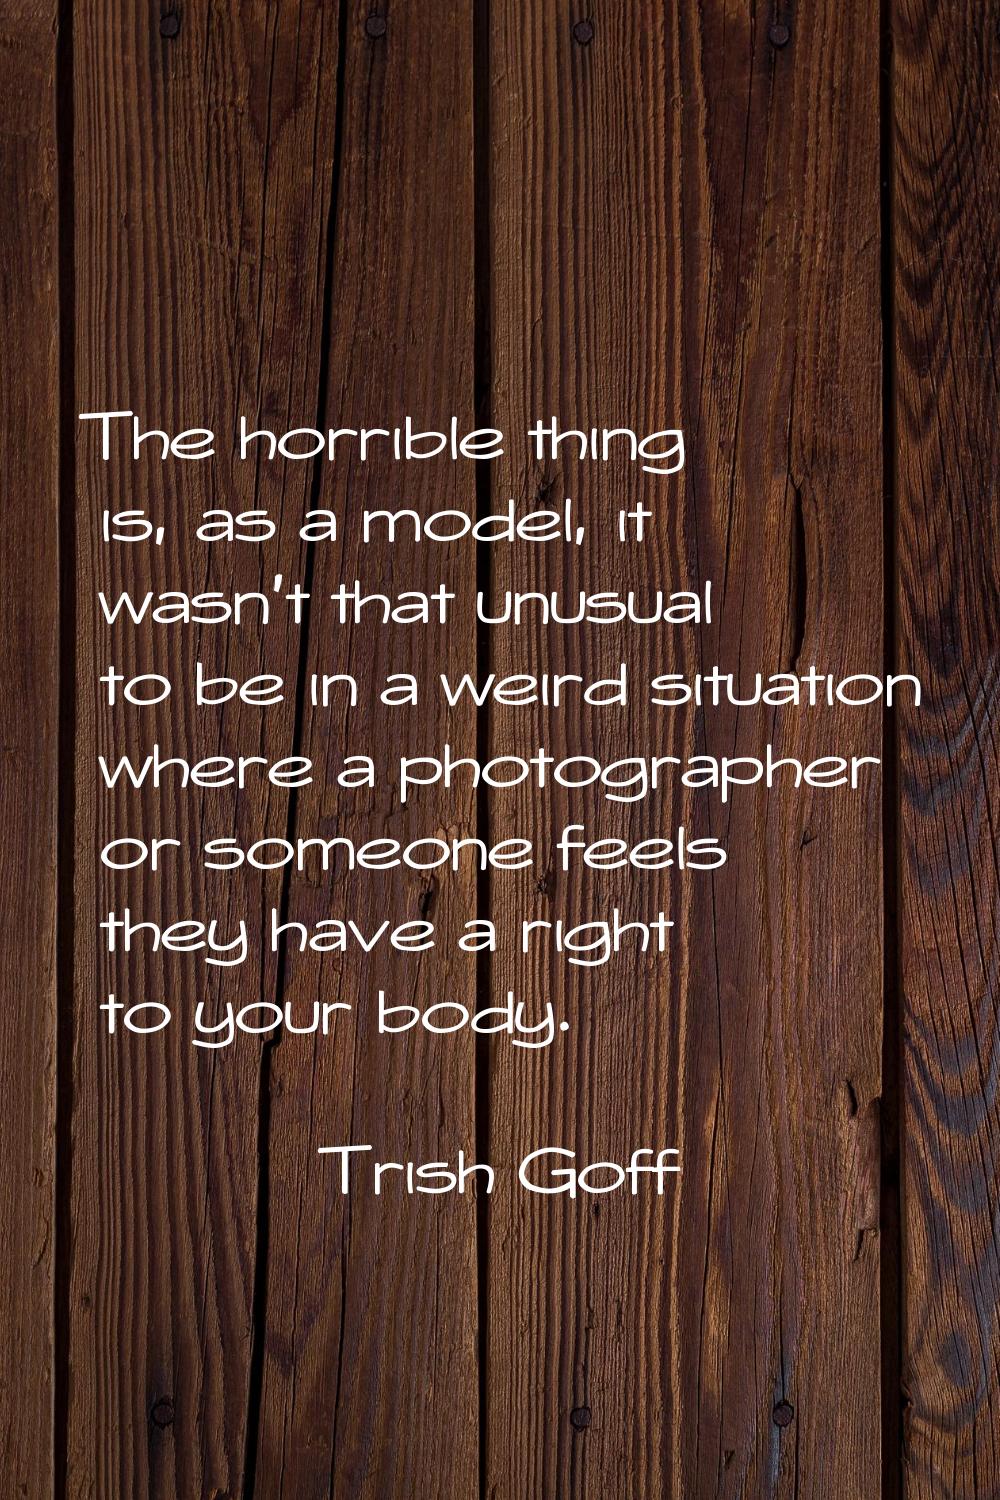 The horrible thing is, as a model, it wasn't that unusual to be in a weird situation where a photog